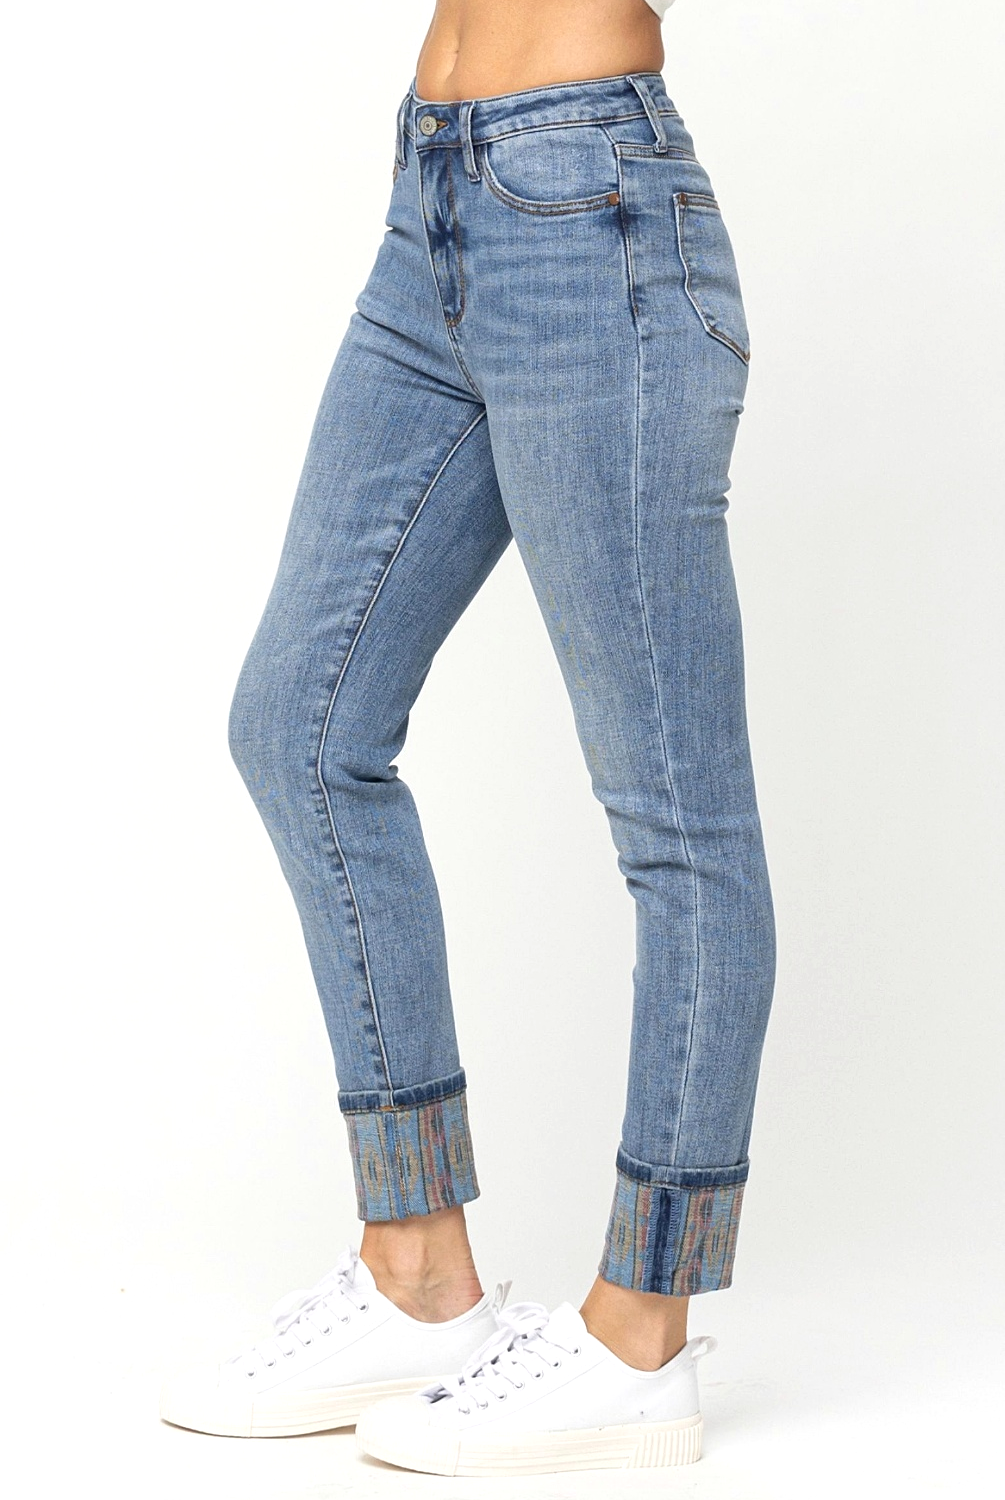 Judy Blue Jeans Bellevue High Rise Tummy Control Top Skinny